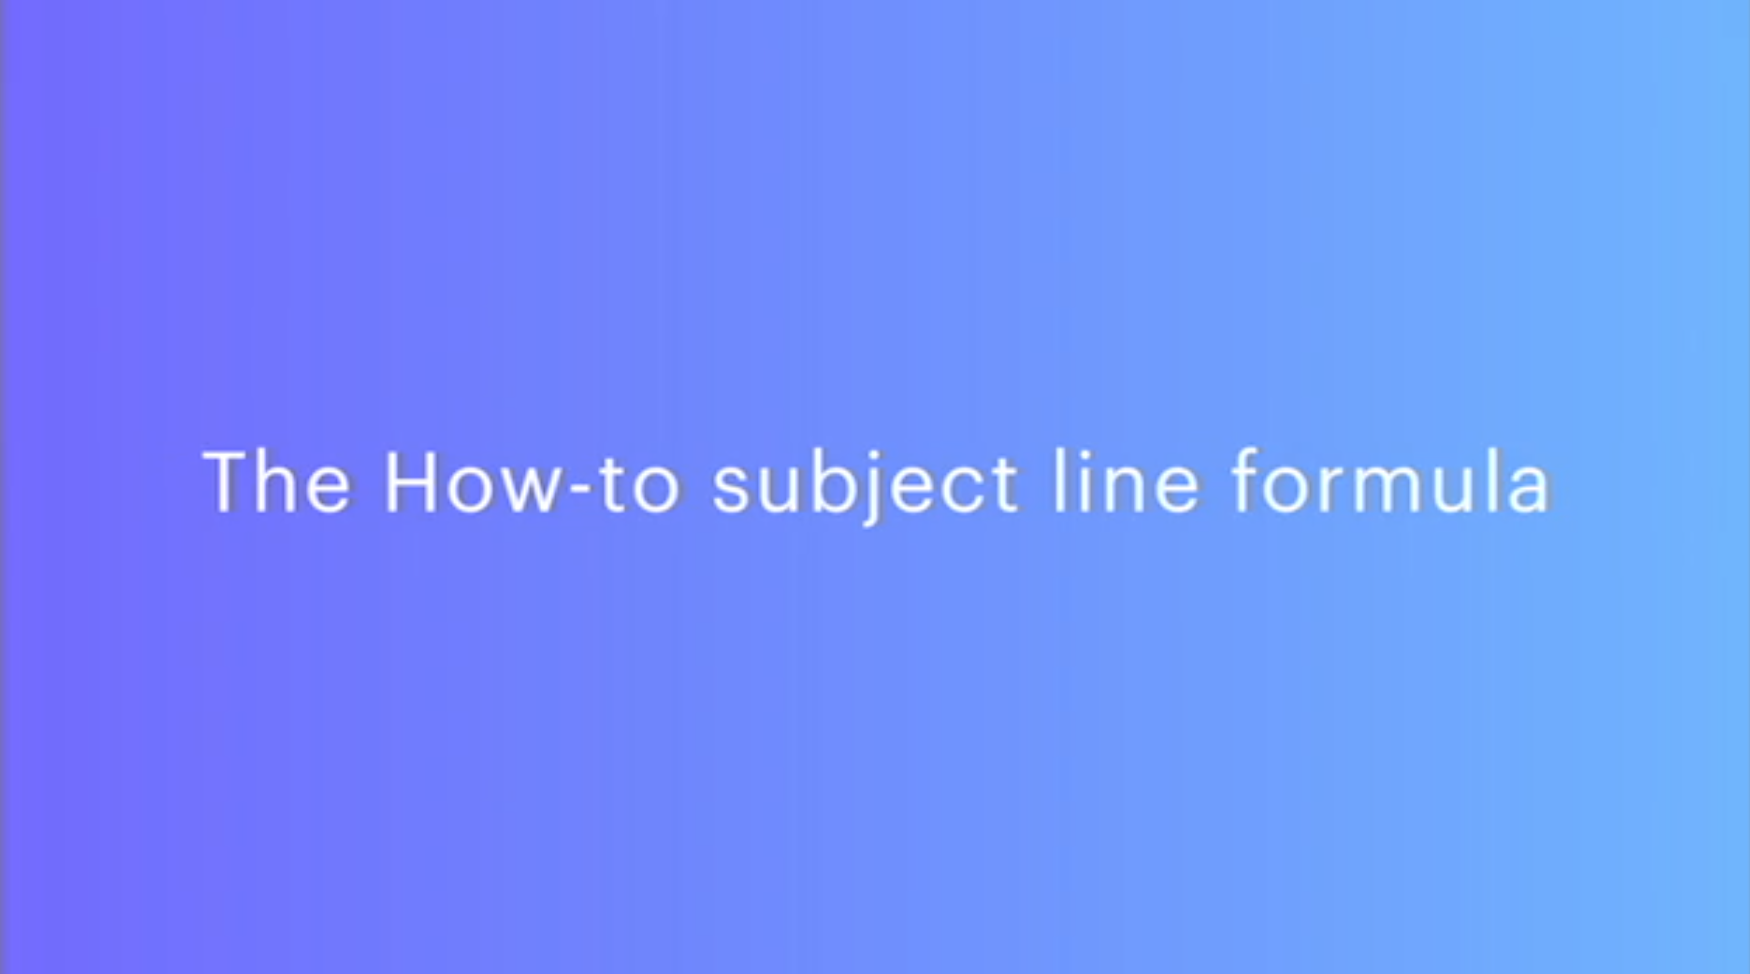 The How-to subject line formula